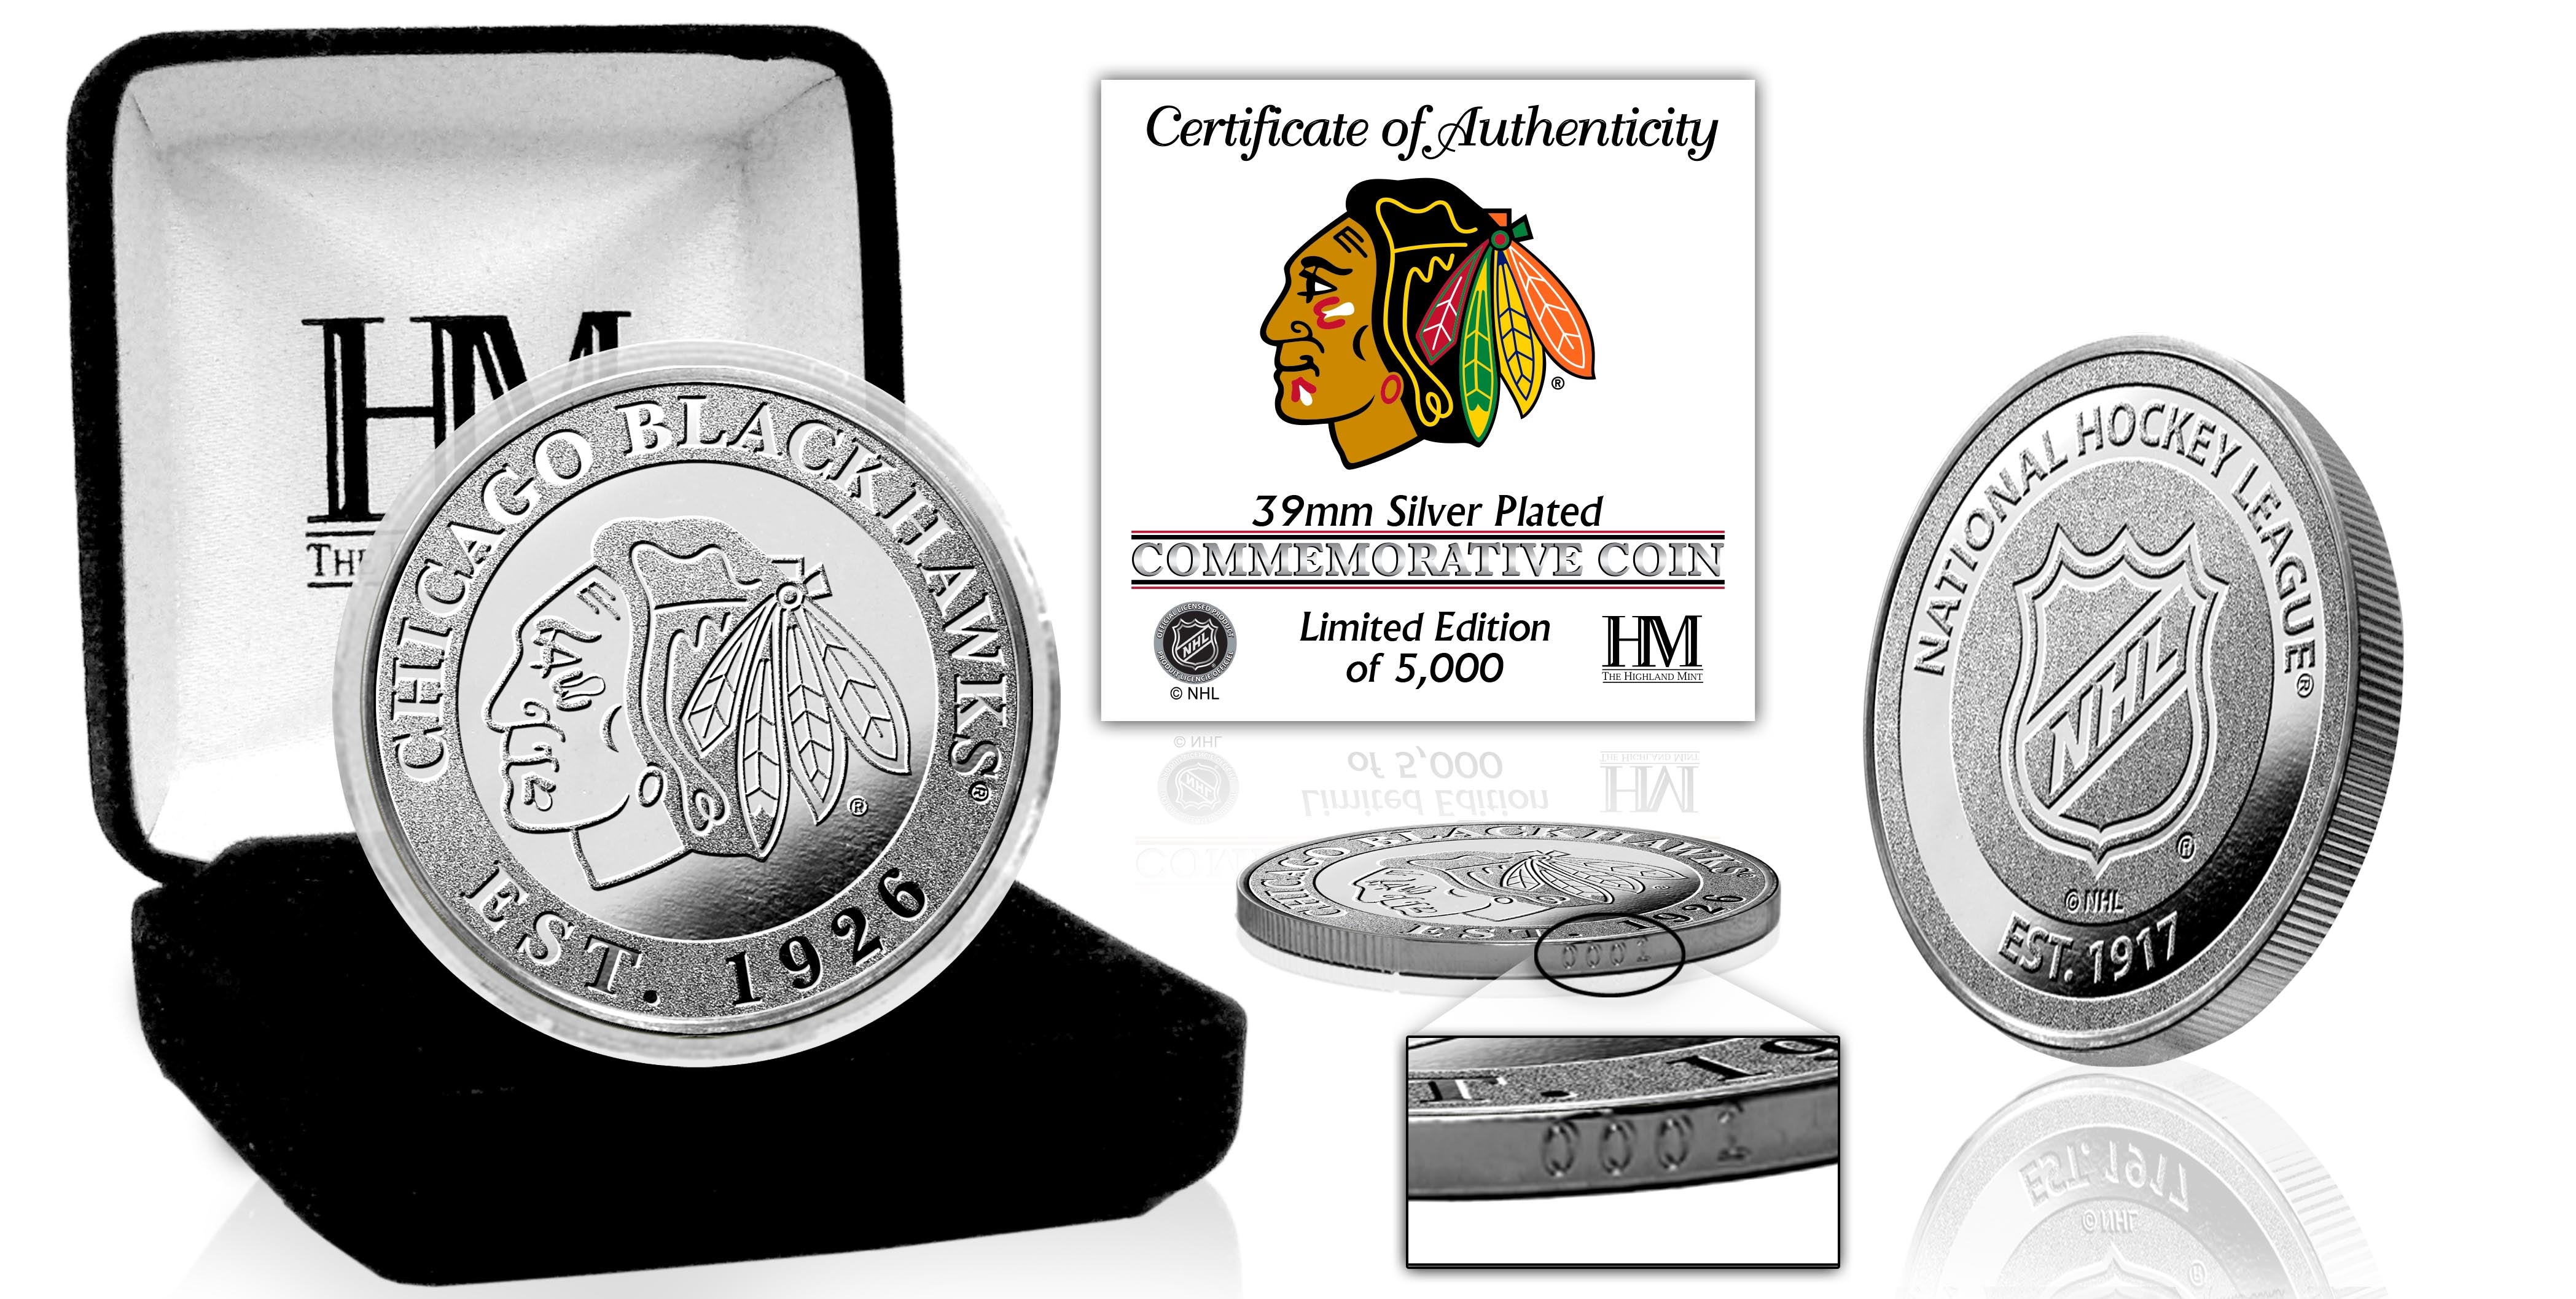 Chicago Blackhawks Silver Mint Coin